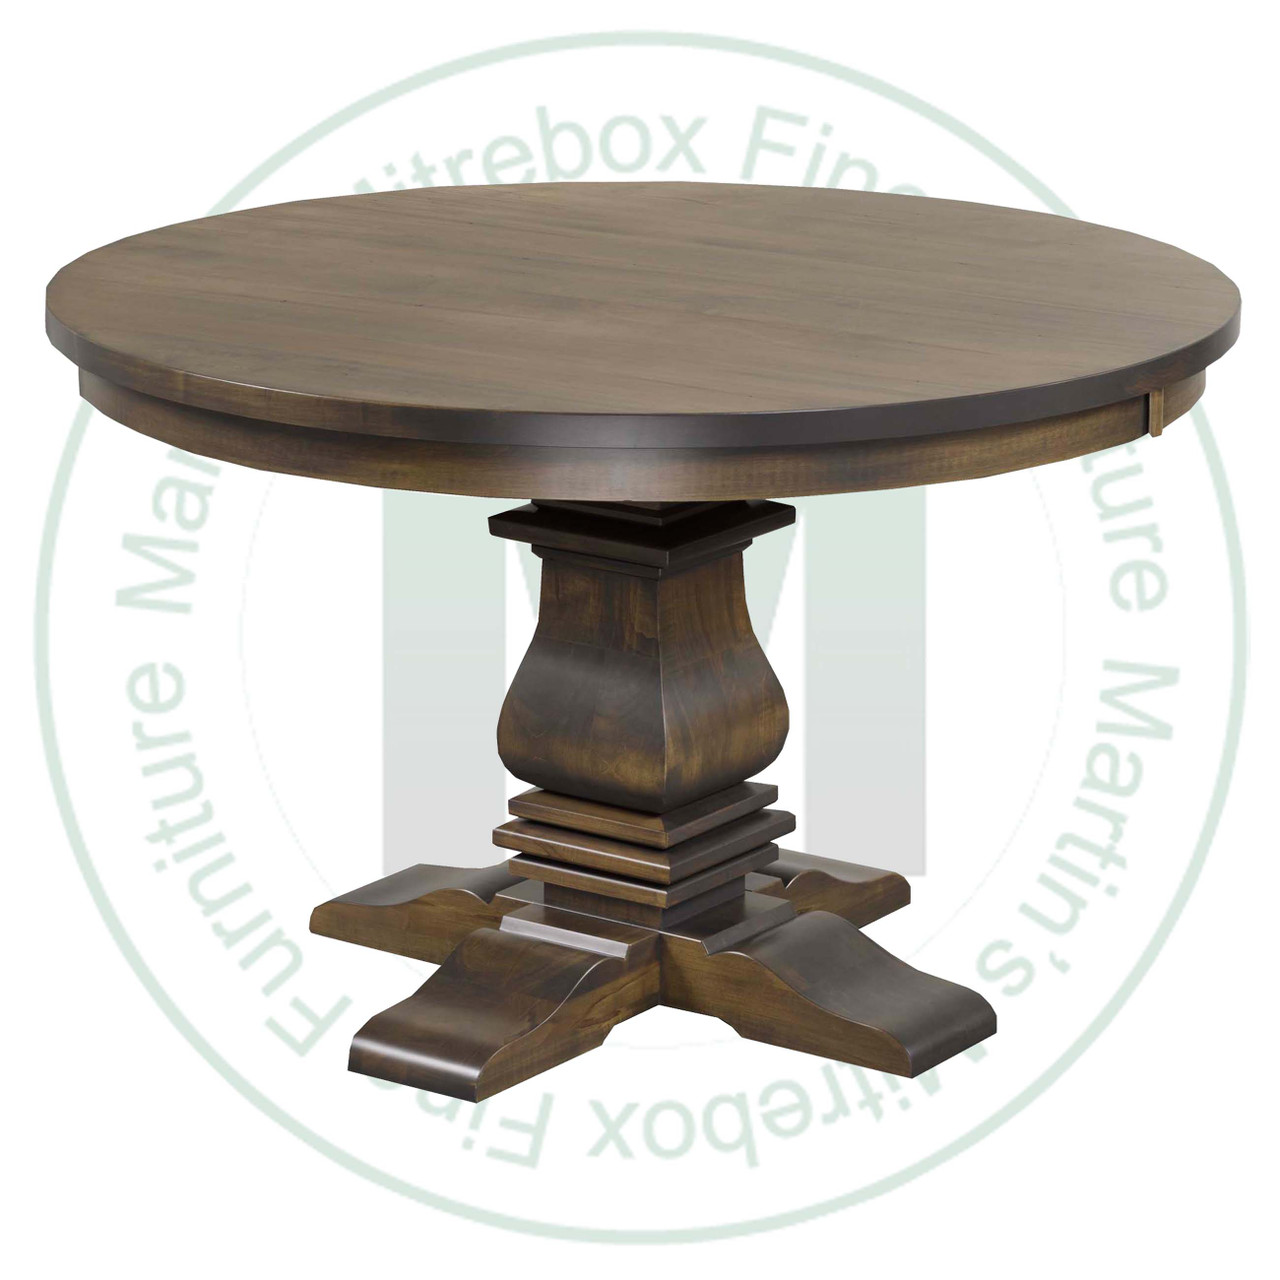 Maple Spartan Collection Single Pedestal Table 36''D x 48''W x 30''H. Table Has 1'' Thick Top